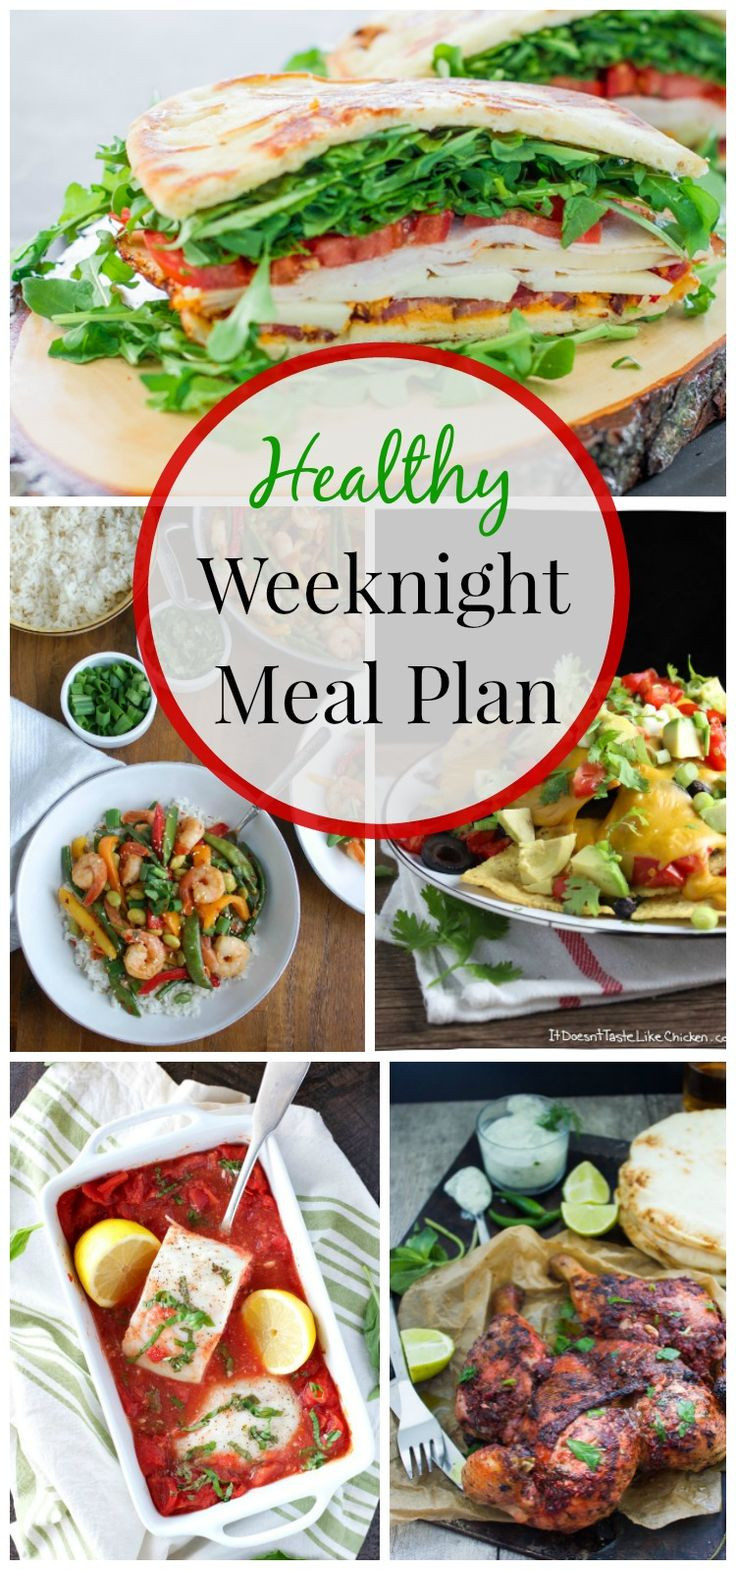 Healthy Weeknight Dinners For Families
 Healthy Weeknight Meal Plan 14